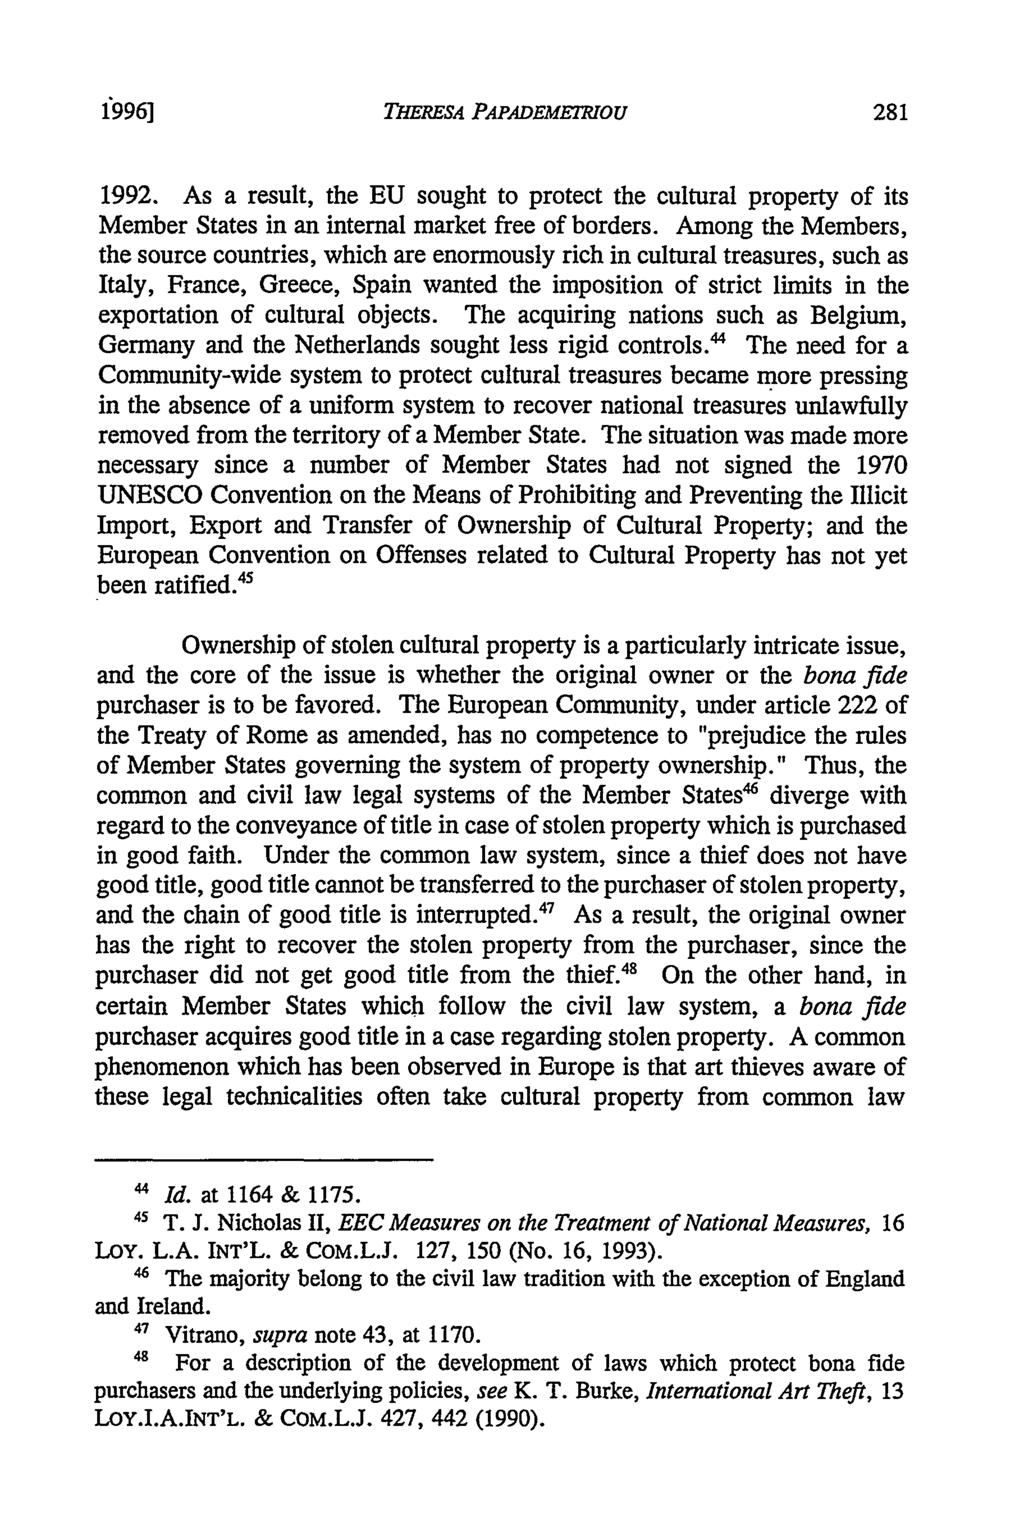 f9961 THERESA PAPADEMETRIOU 1992. As a result, the EU sought to protect the cultural property of its Member States in an internal market free of borders.